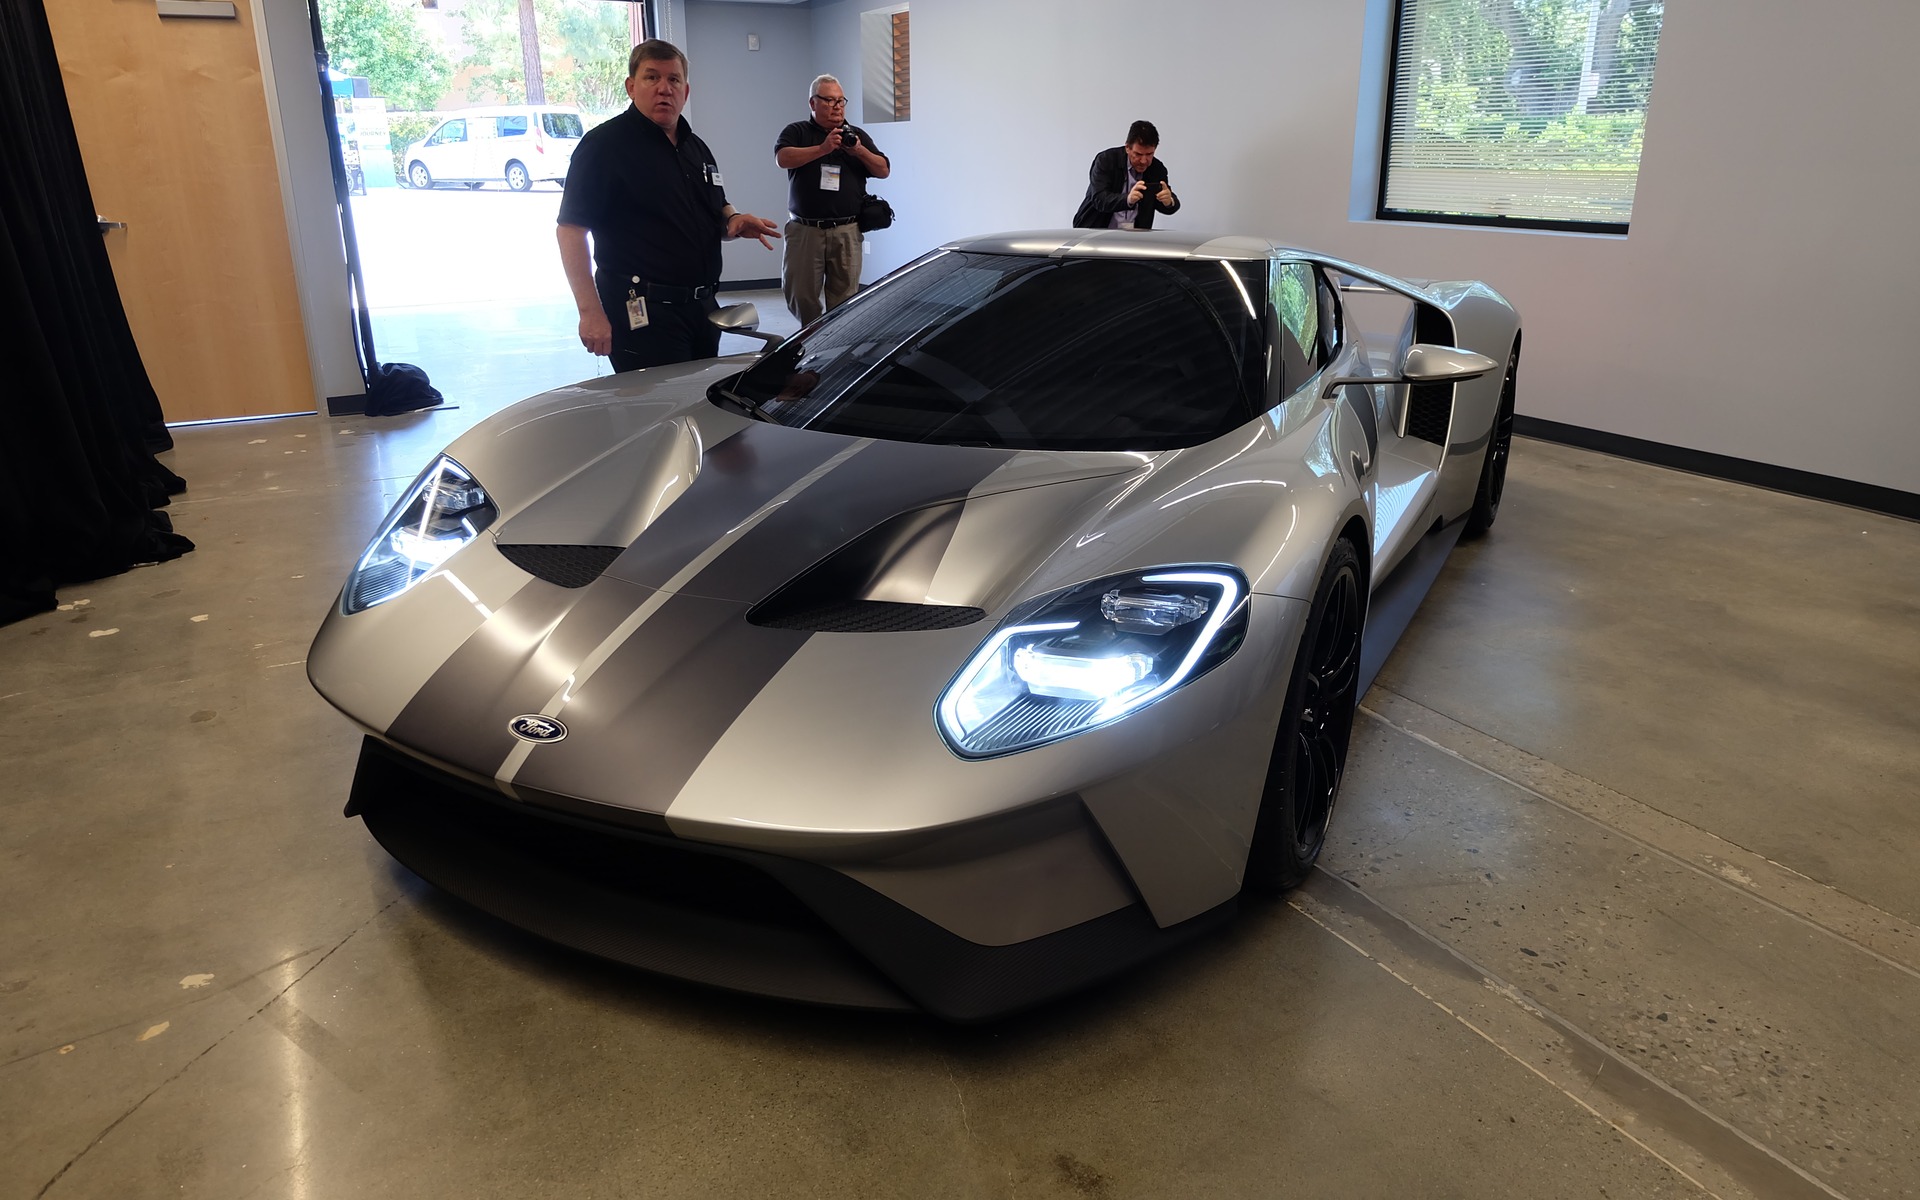 The voluptuous Ford GT made a surprise appearance.